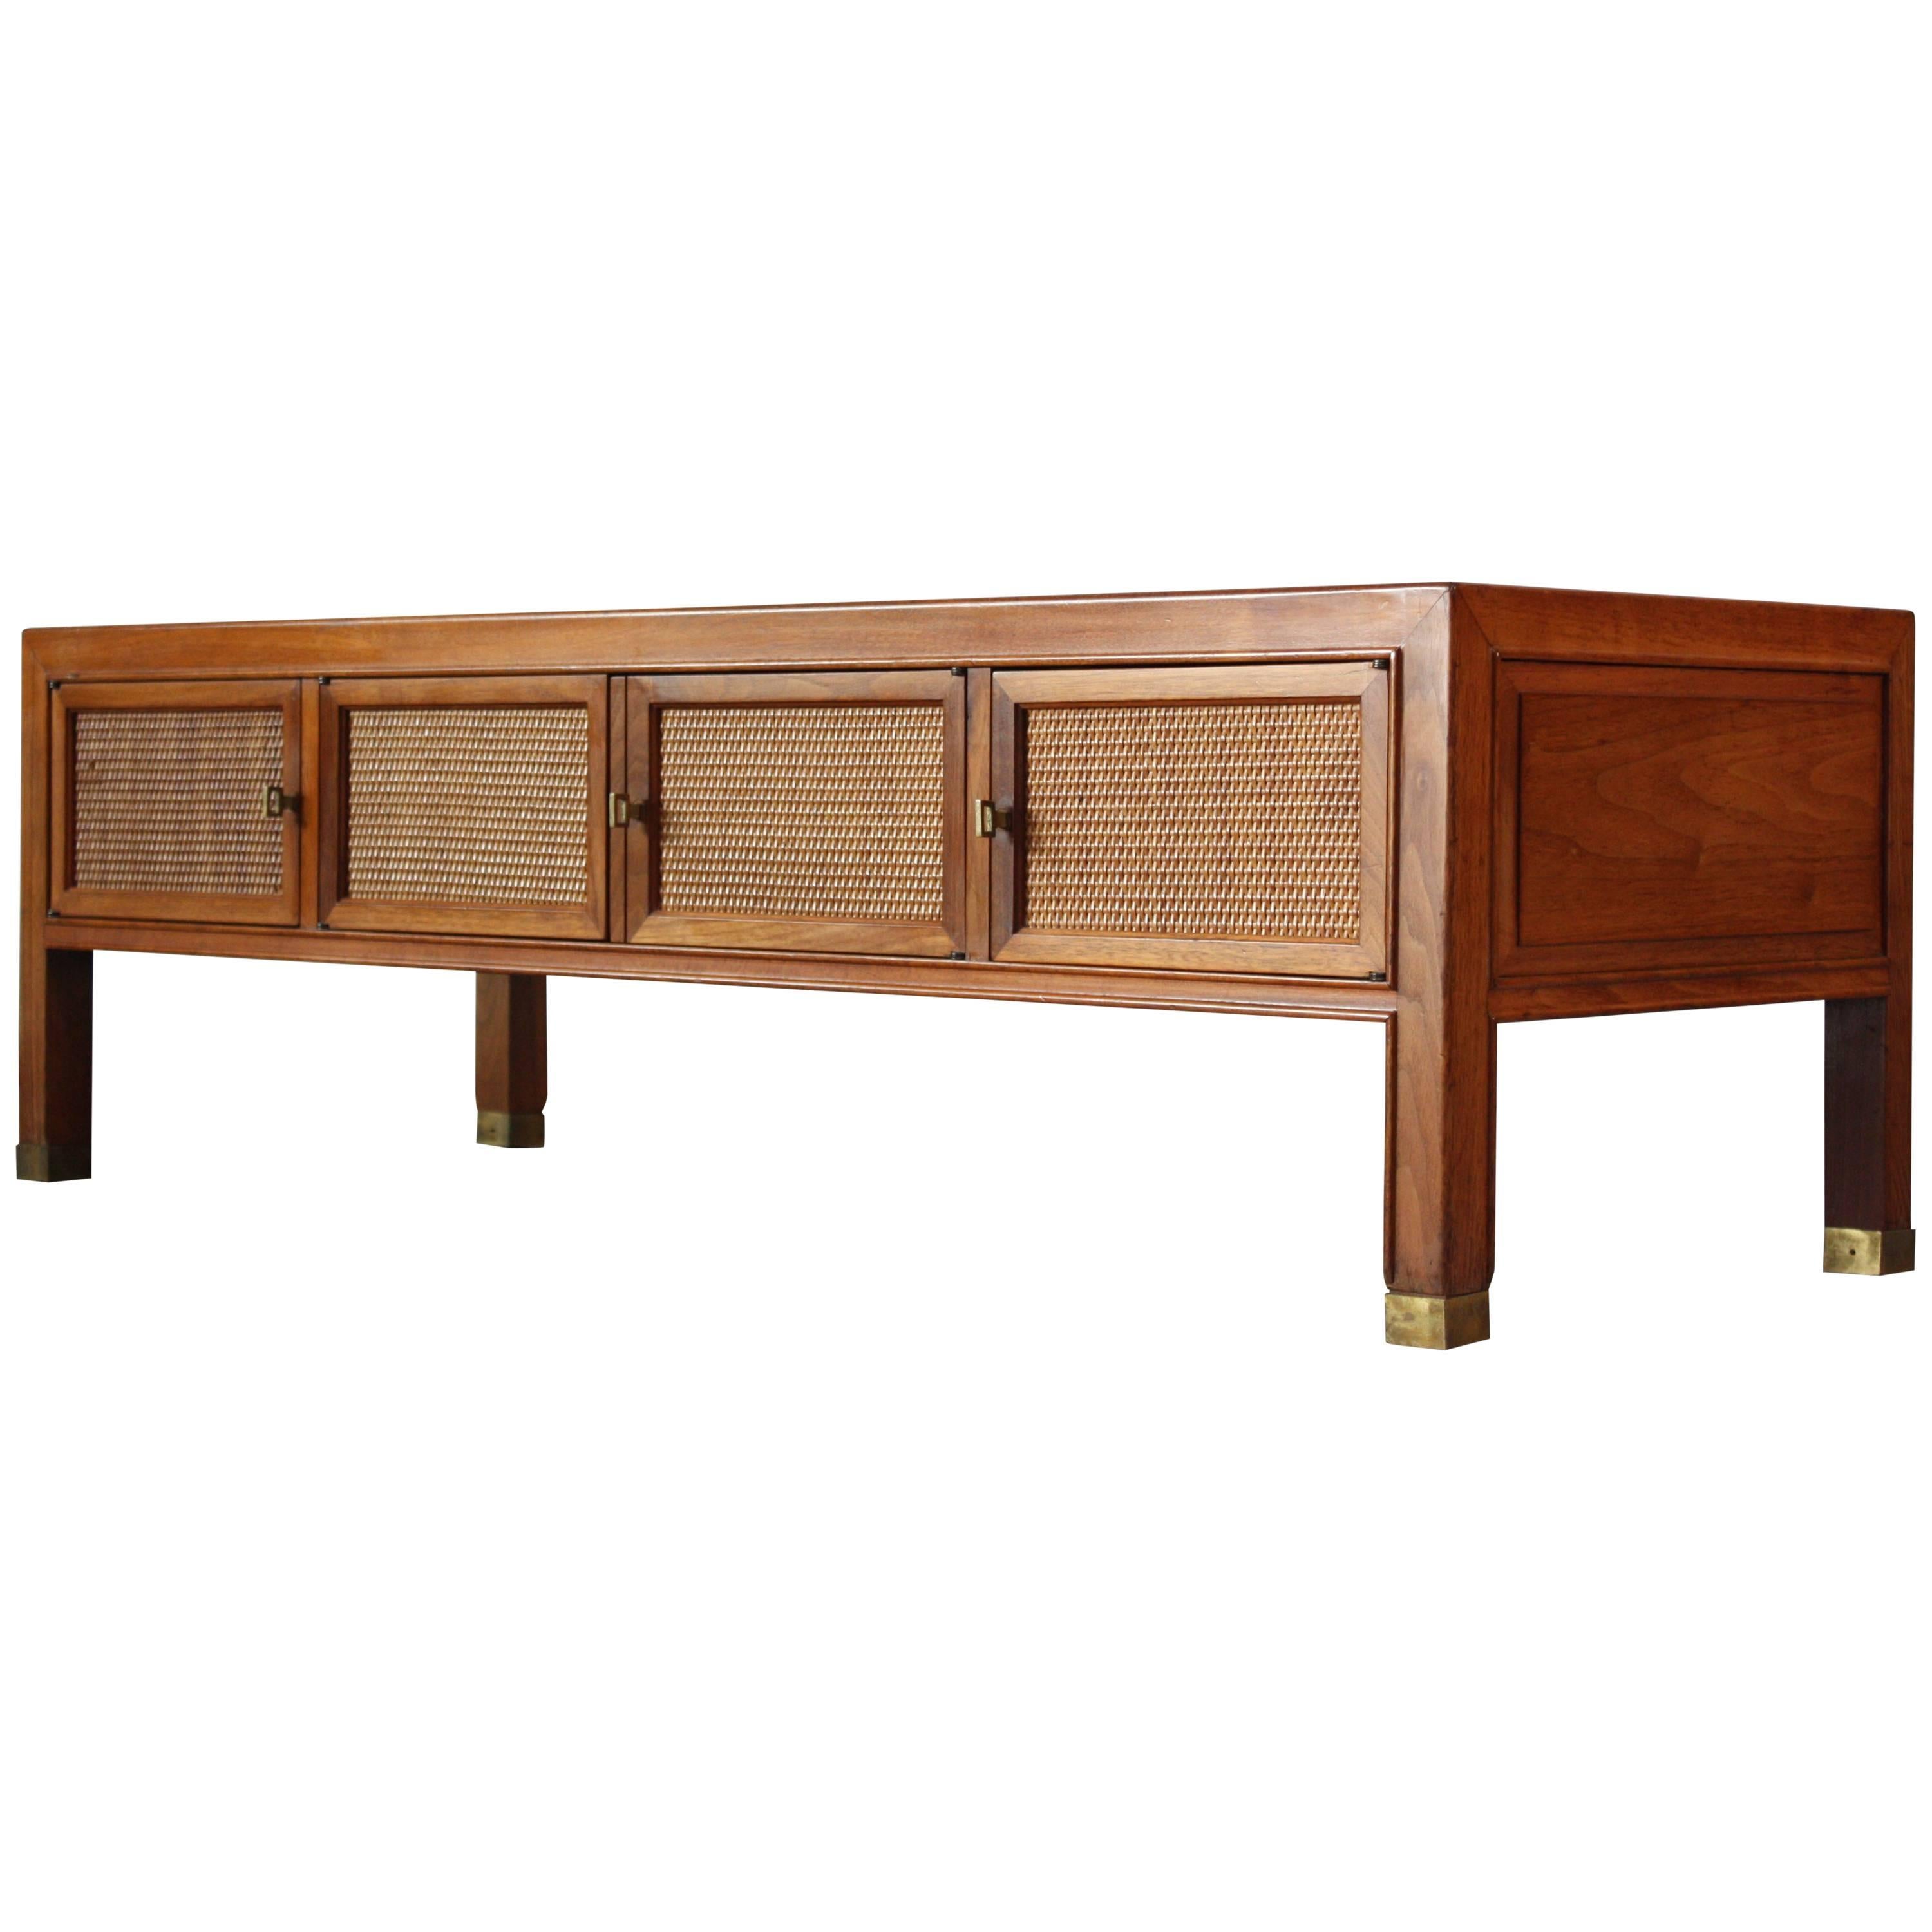 Drexel Walnut and Cane Coffee Table or Cabinet